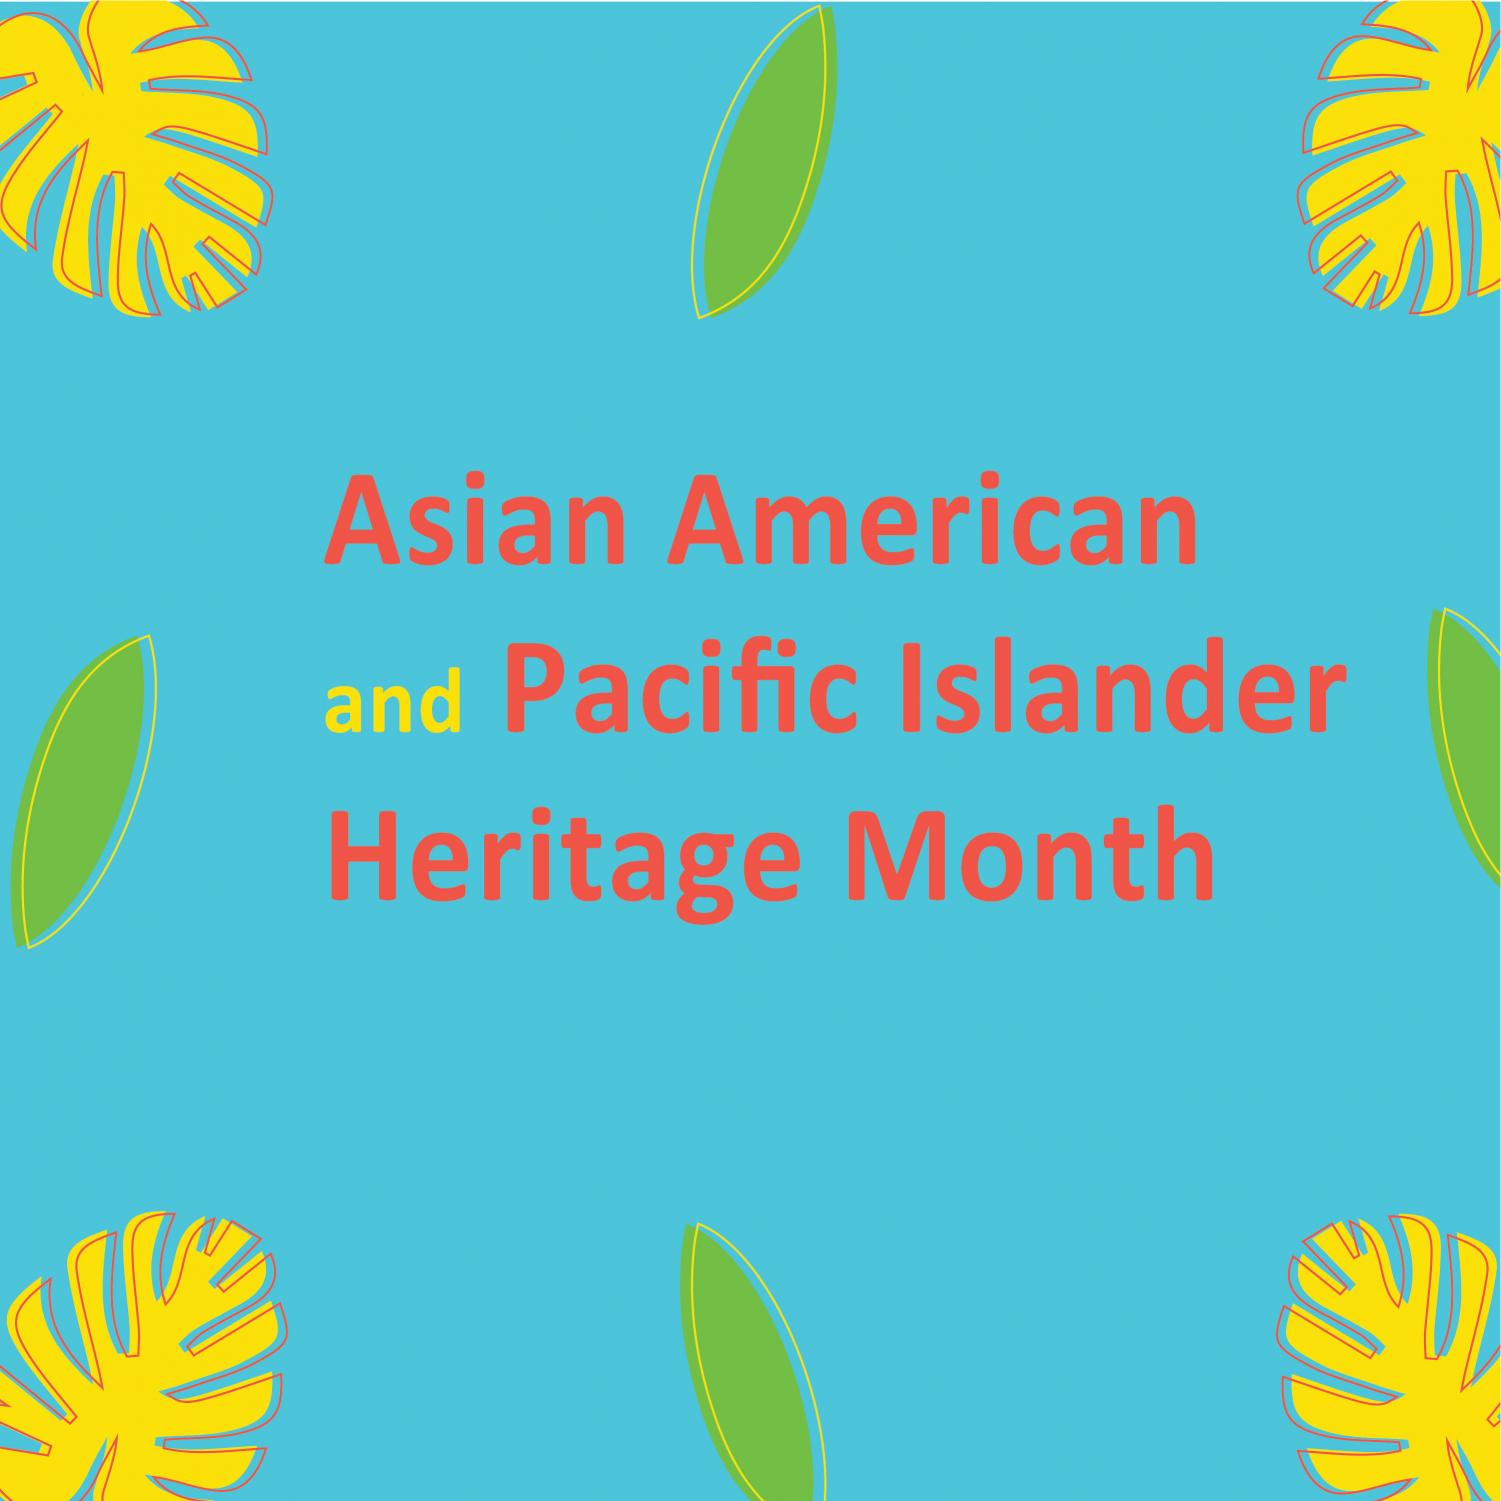 AAPI+Heritage+Month%3A+Dr.+Chien-Shiung+Wu